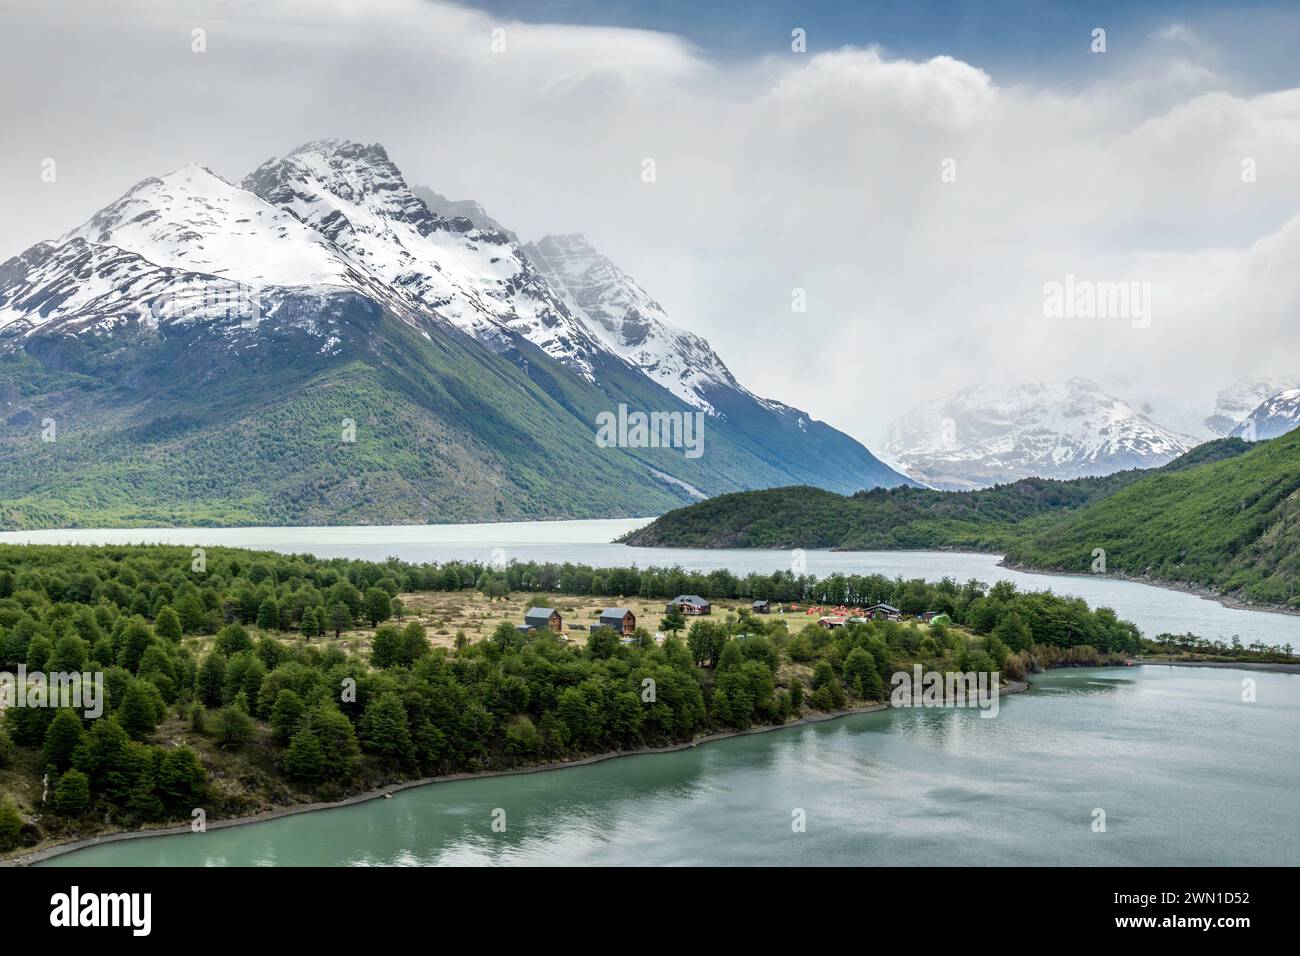 Views from the 'O' circuit in The Torres Del Paine National Park in Southern Patagonia, Chile, South America. Stock Photo